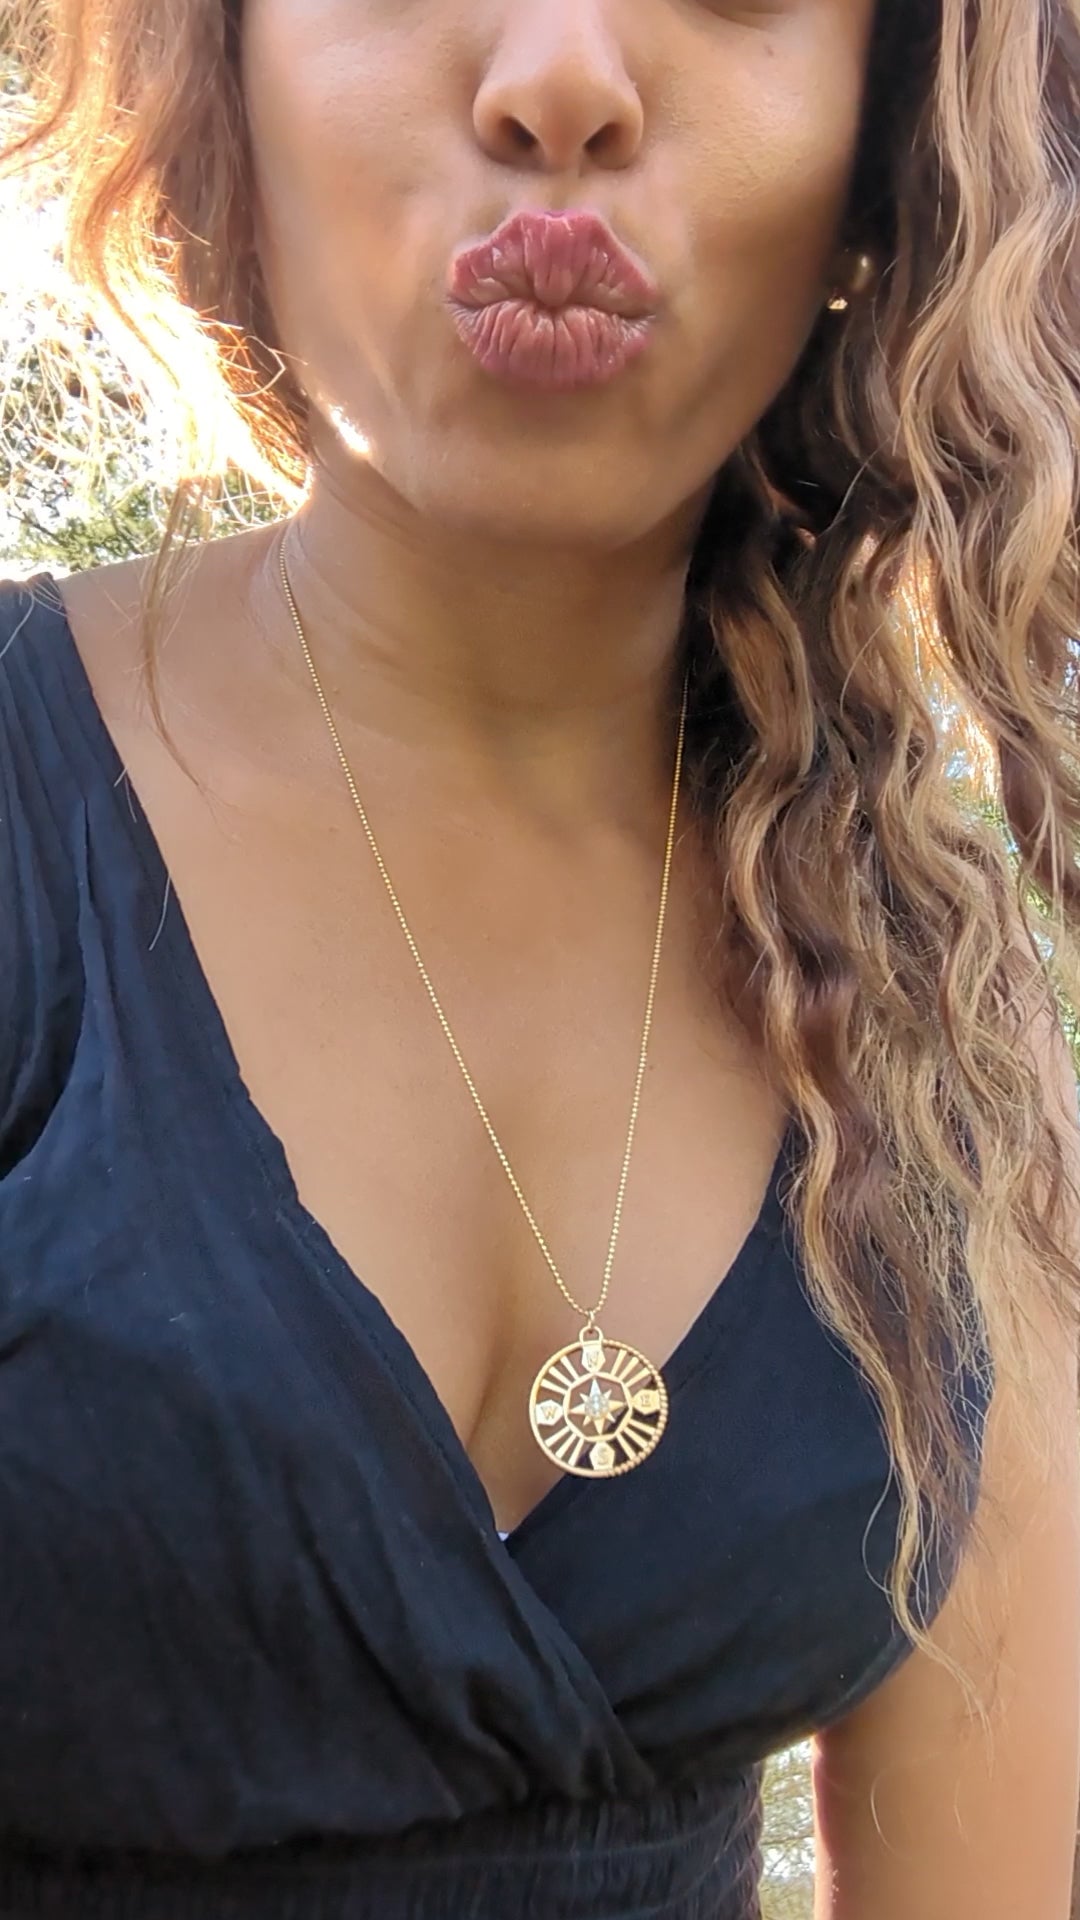 video of black woman with curly hair wearing the 7 diamond compass necklace from the wandering jewel